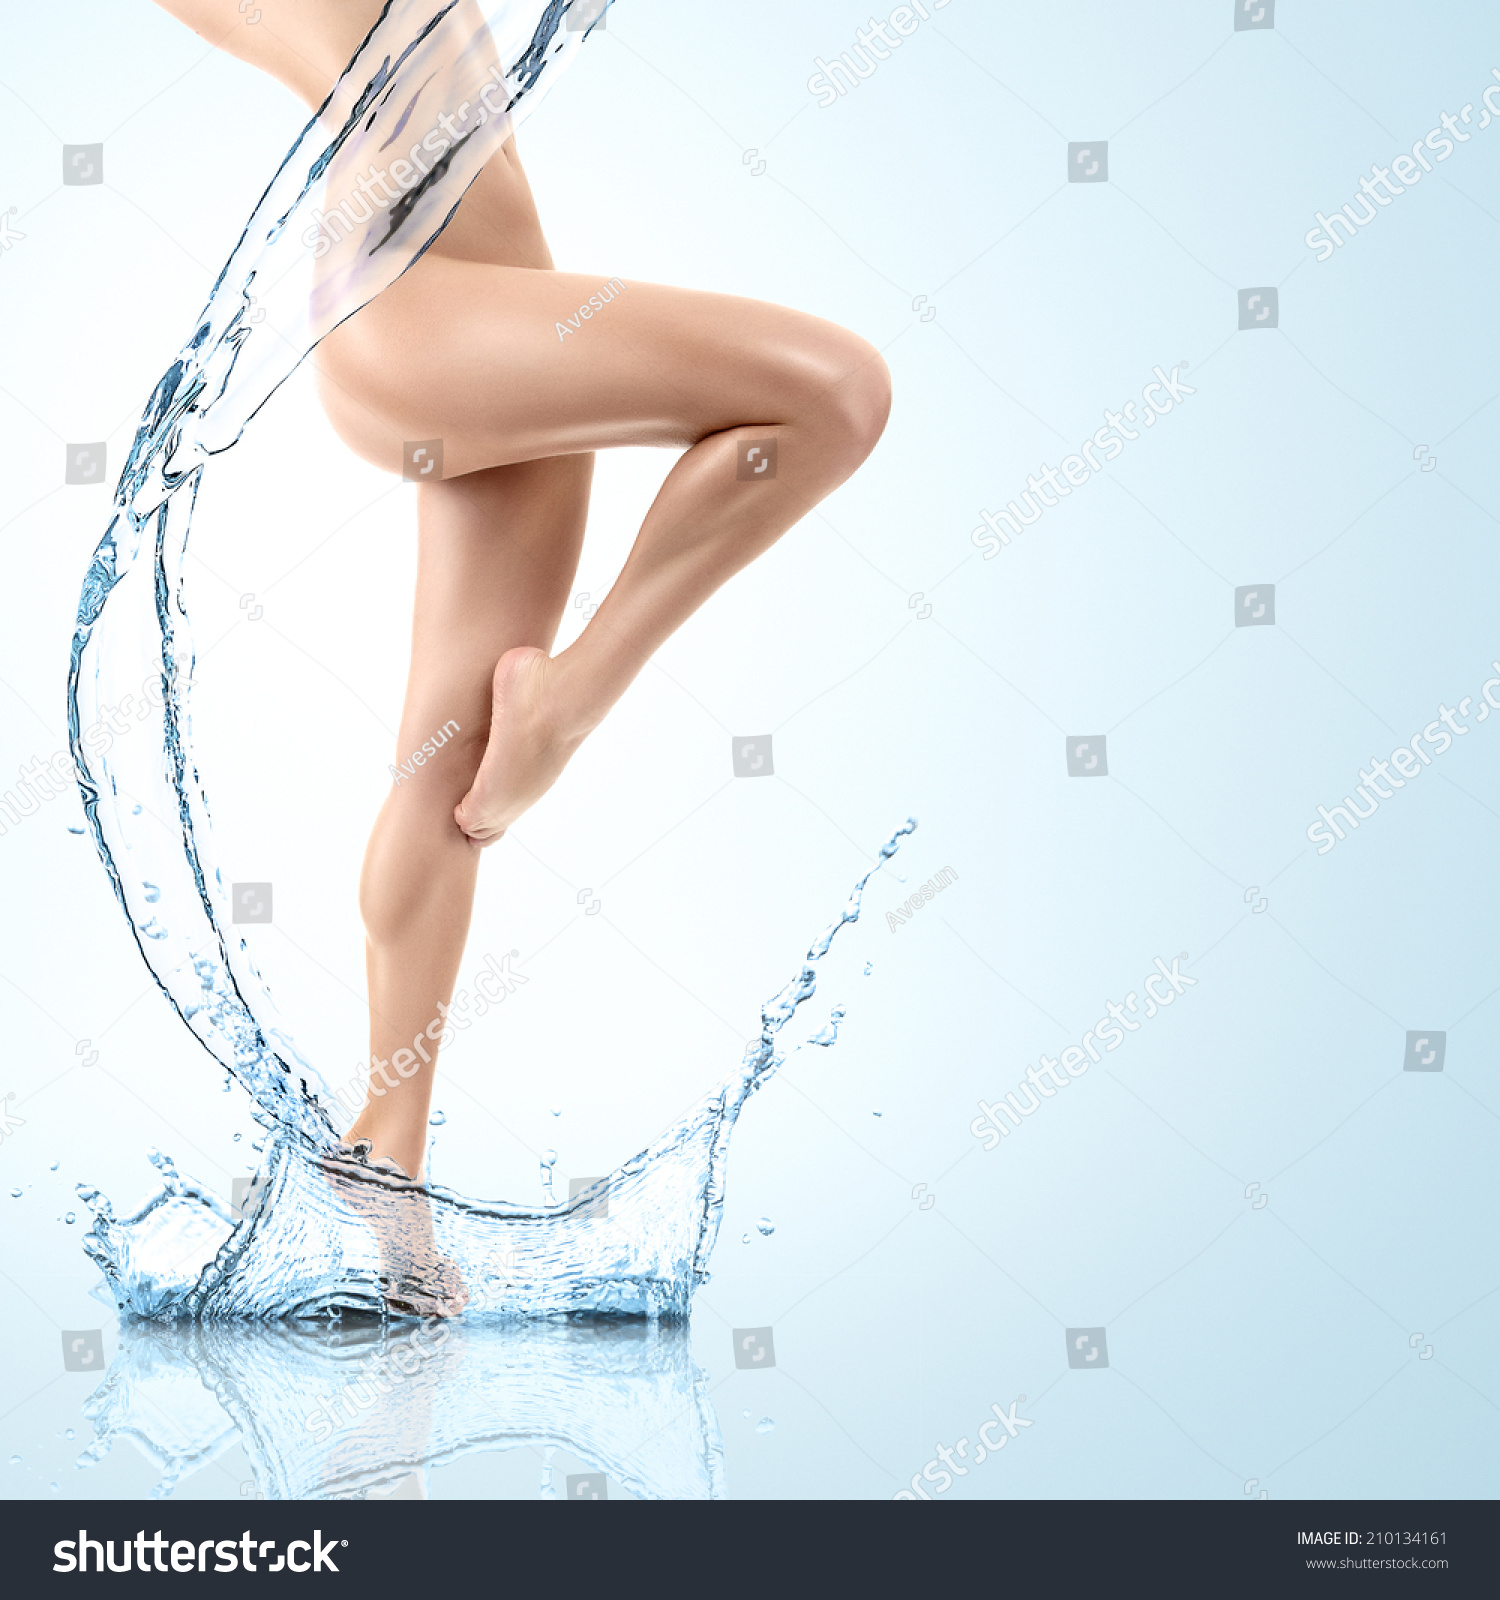 Design of young woman body with clean water splash #210134161